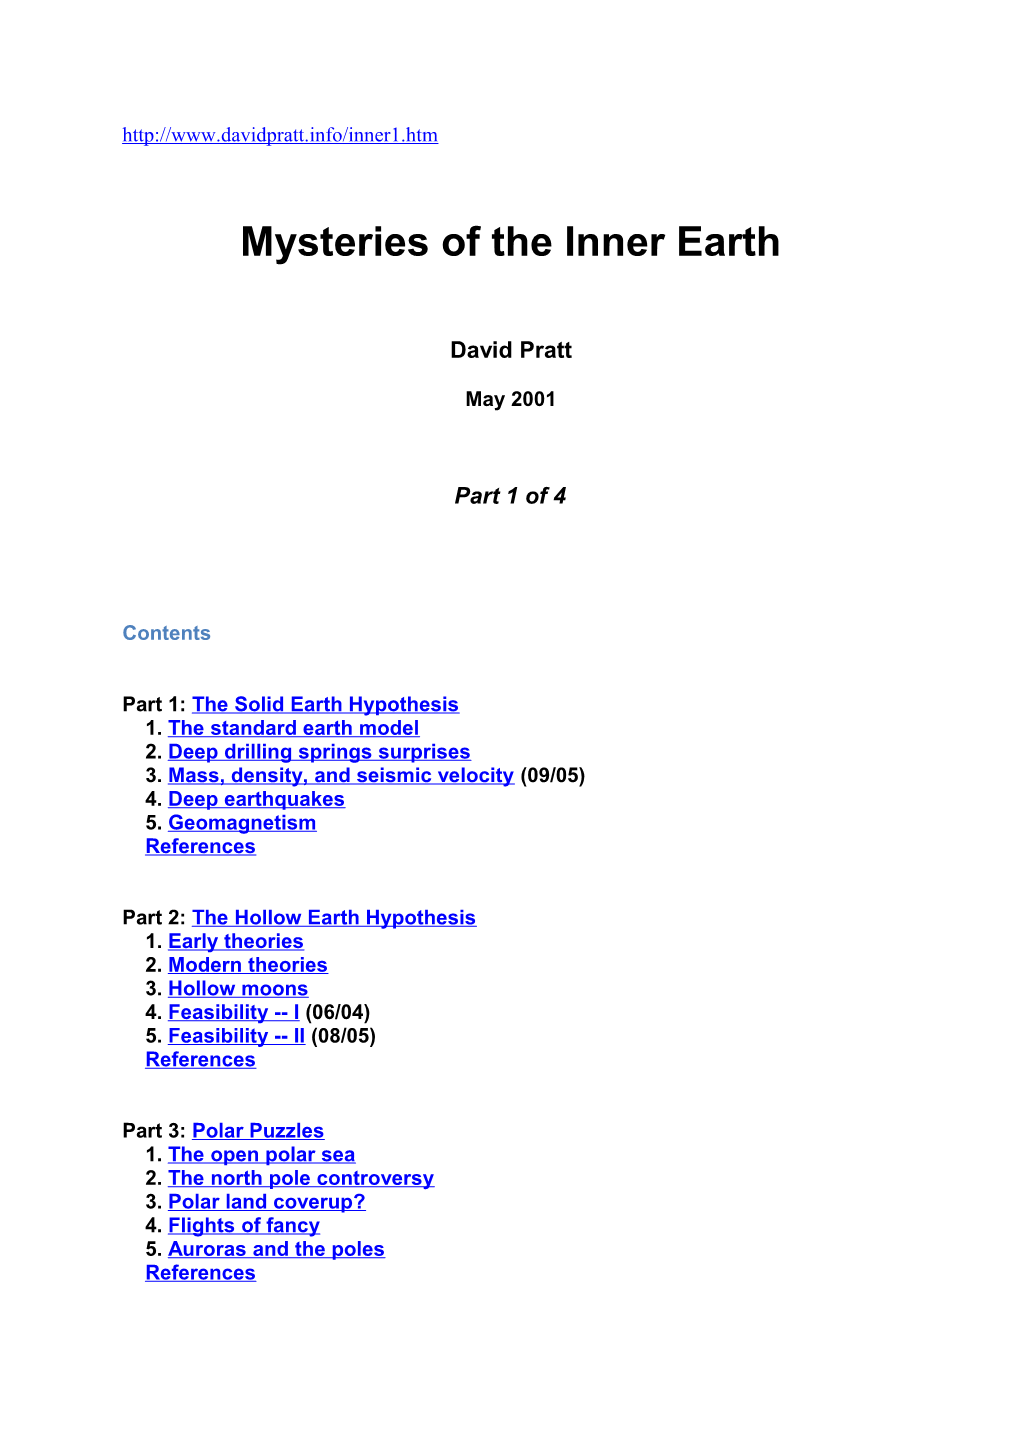 Mysteries of the Inner Earth